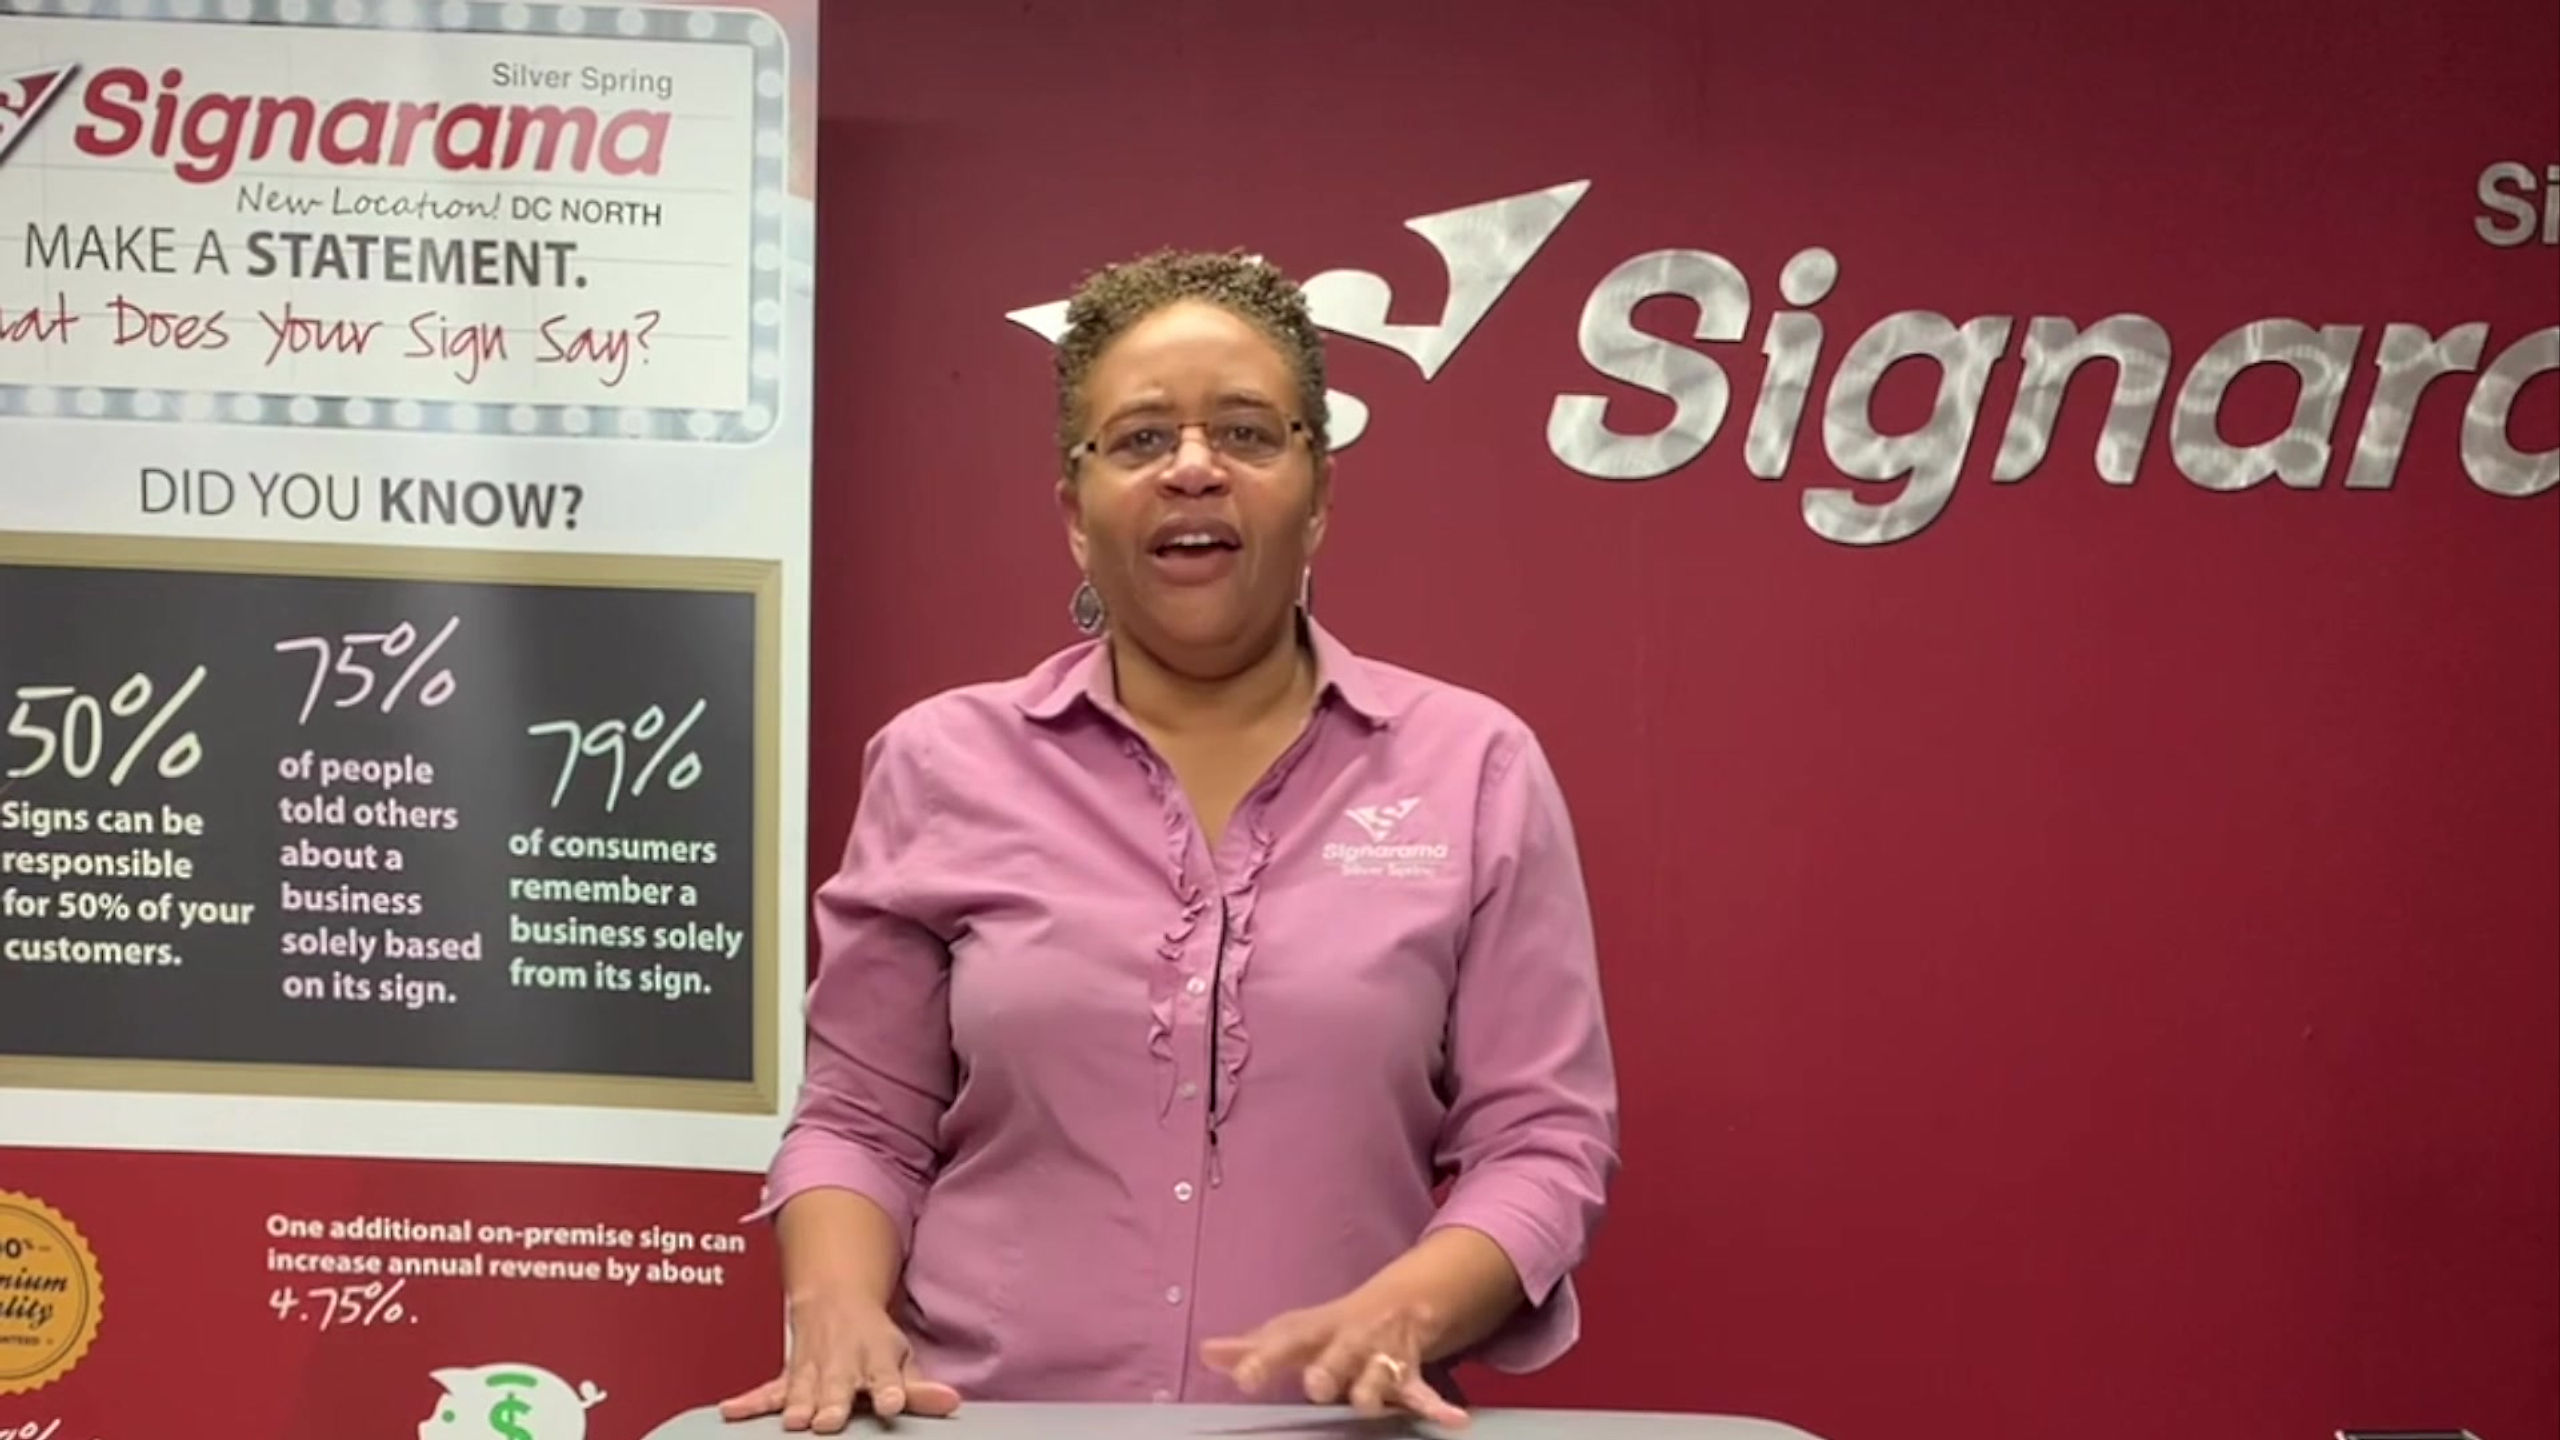 Testimonial |  Stacey Brown, Owner of Signarama Silver Spring & DC